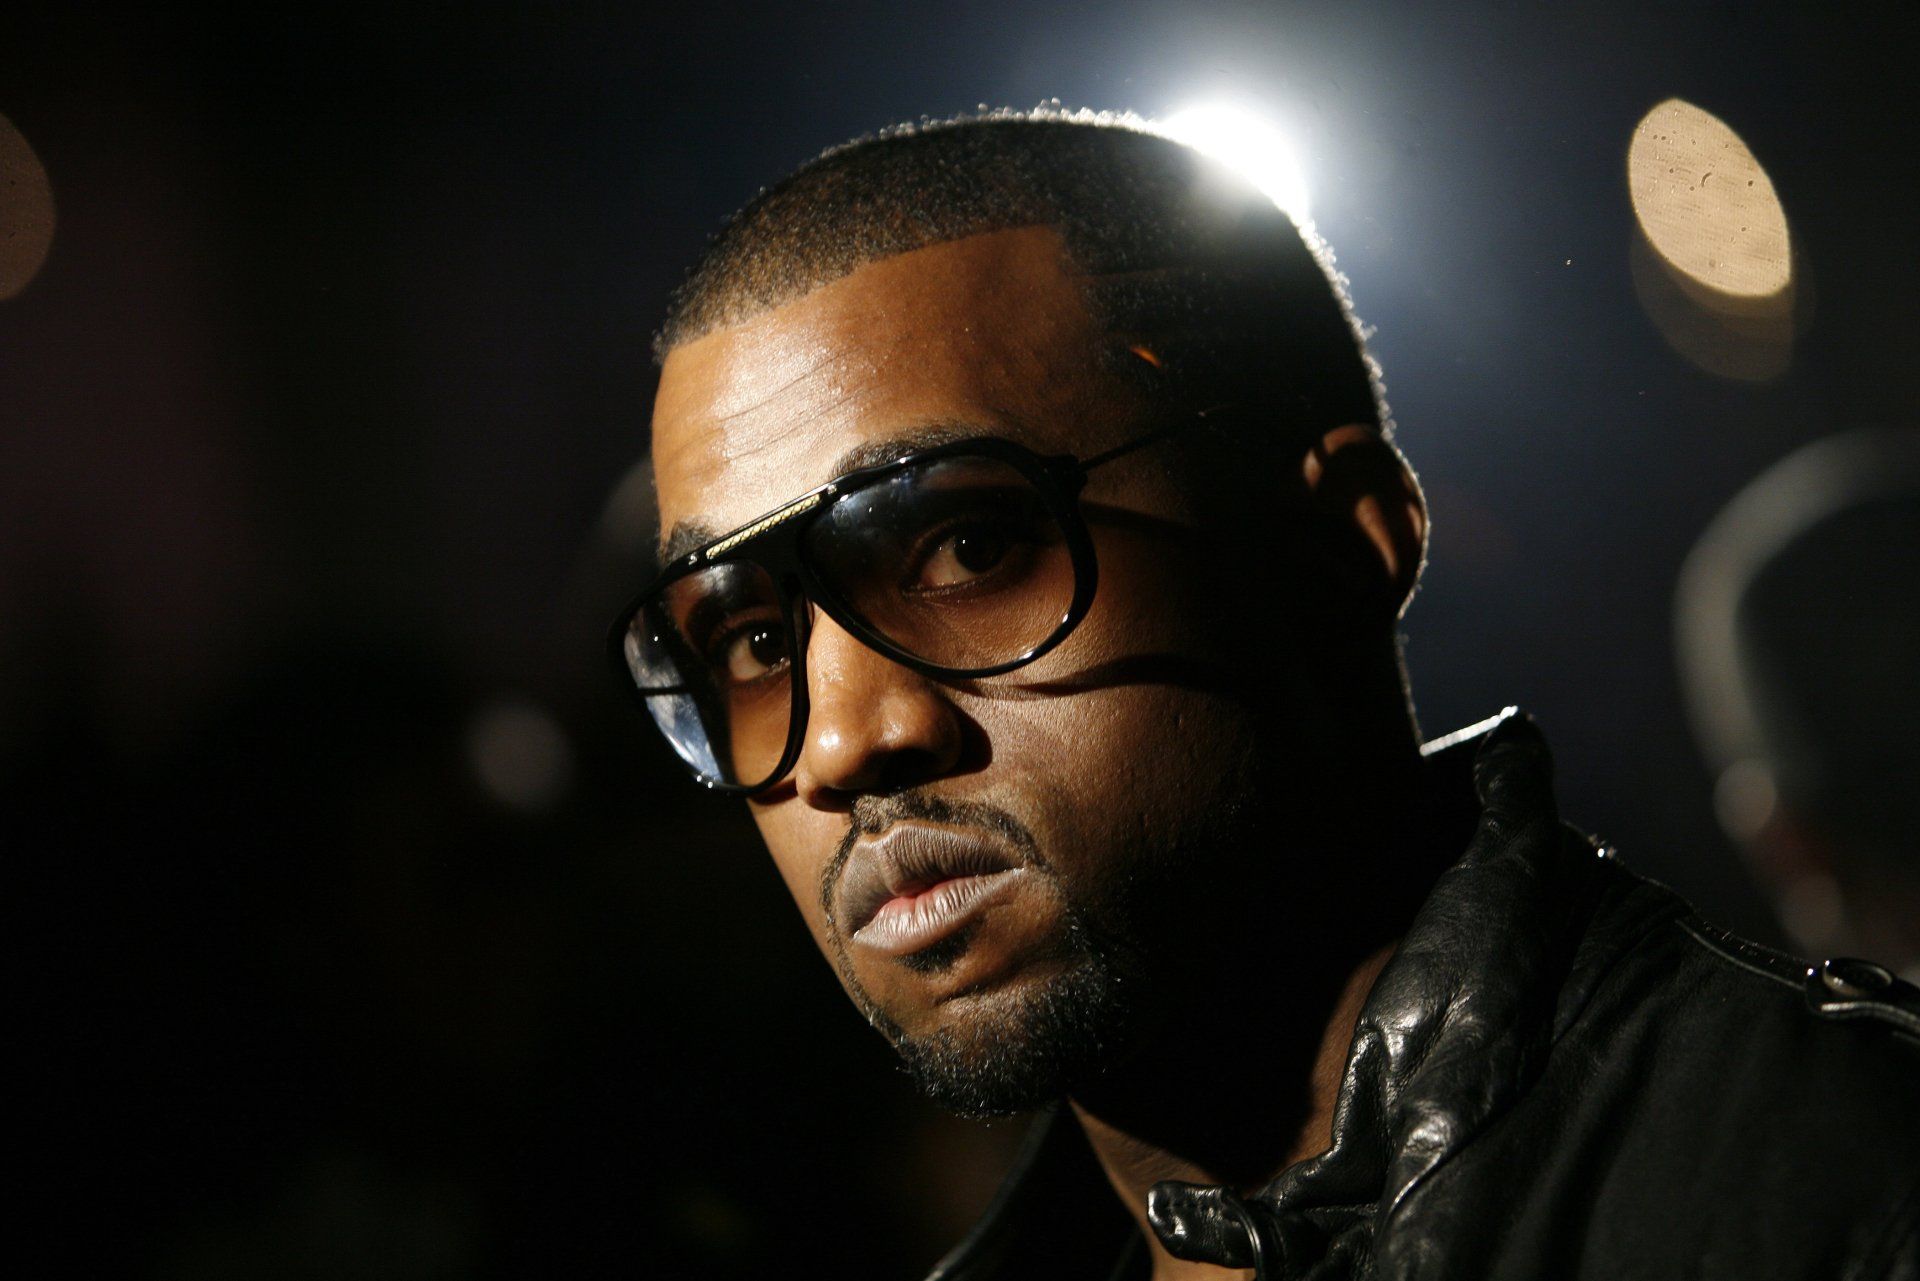 Kanye West is wearing glasses and looking to the side. - Kanye West